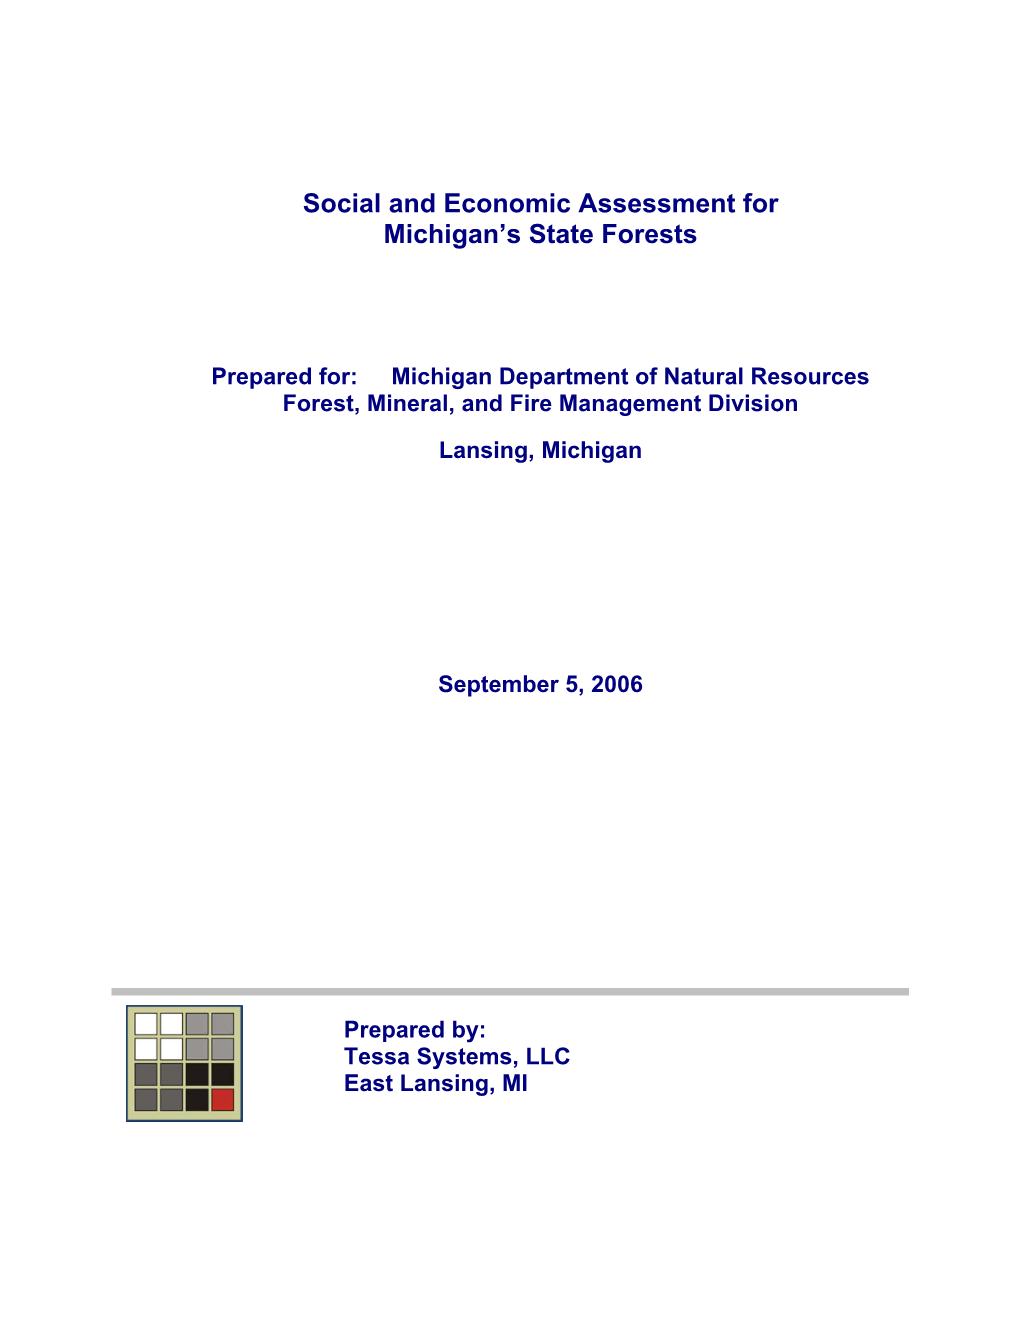 Social and Economic Assessment for Michigan's State Forests